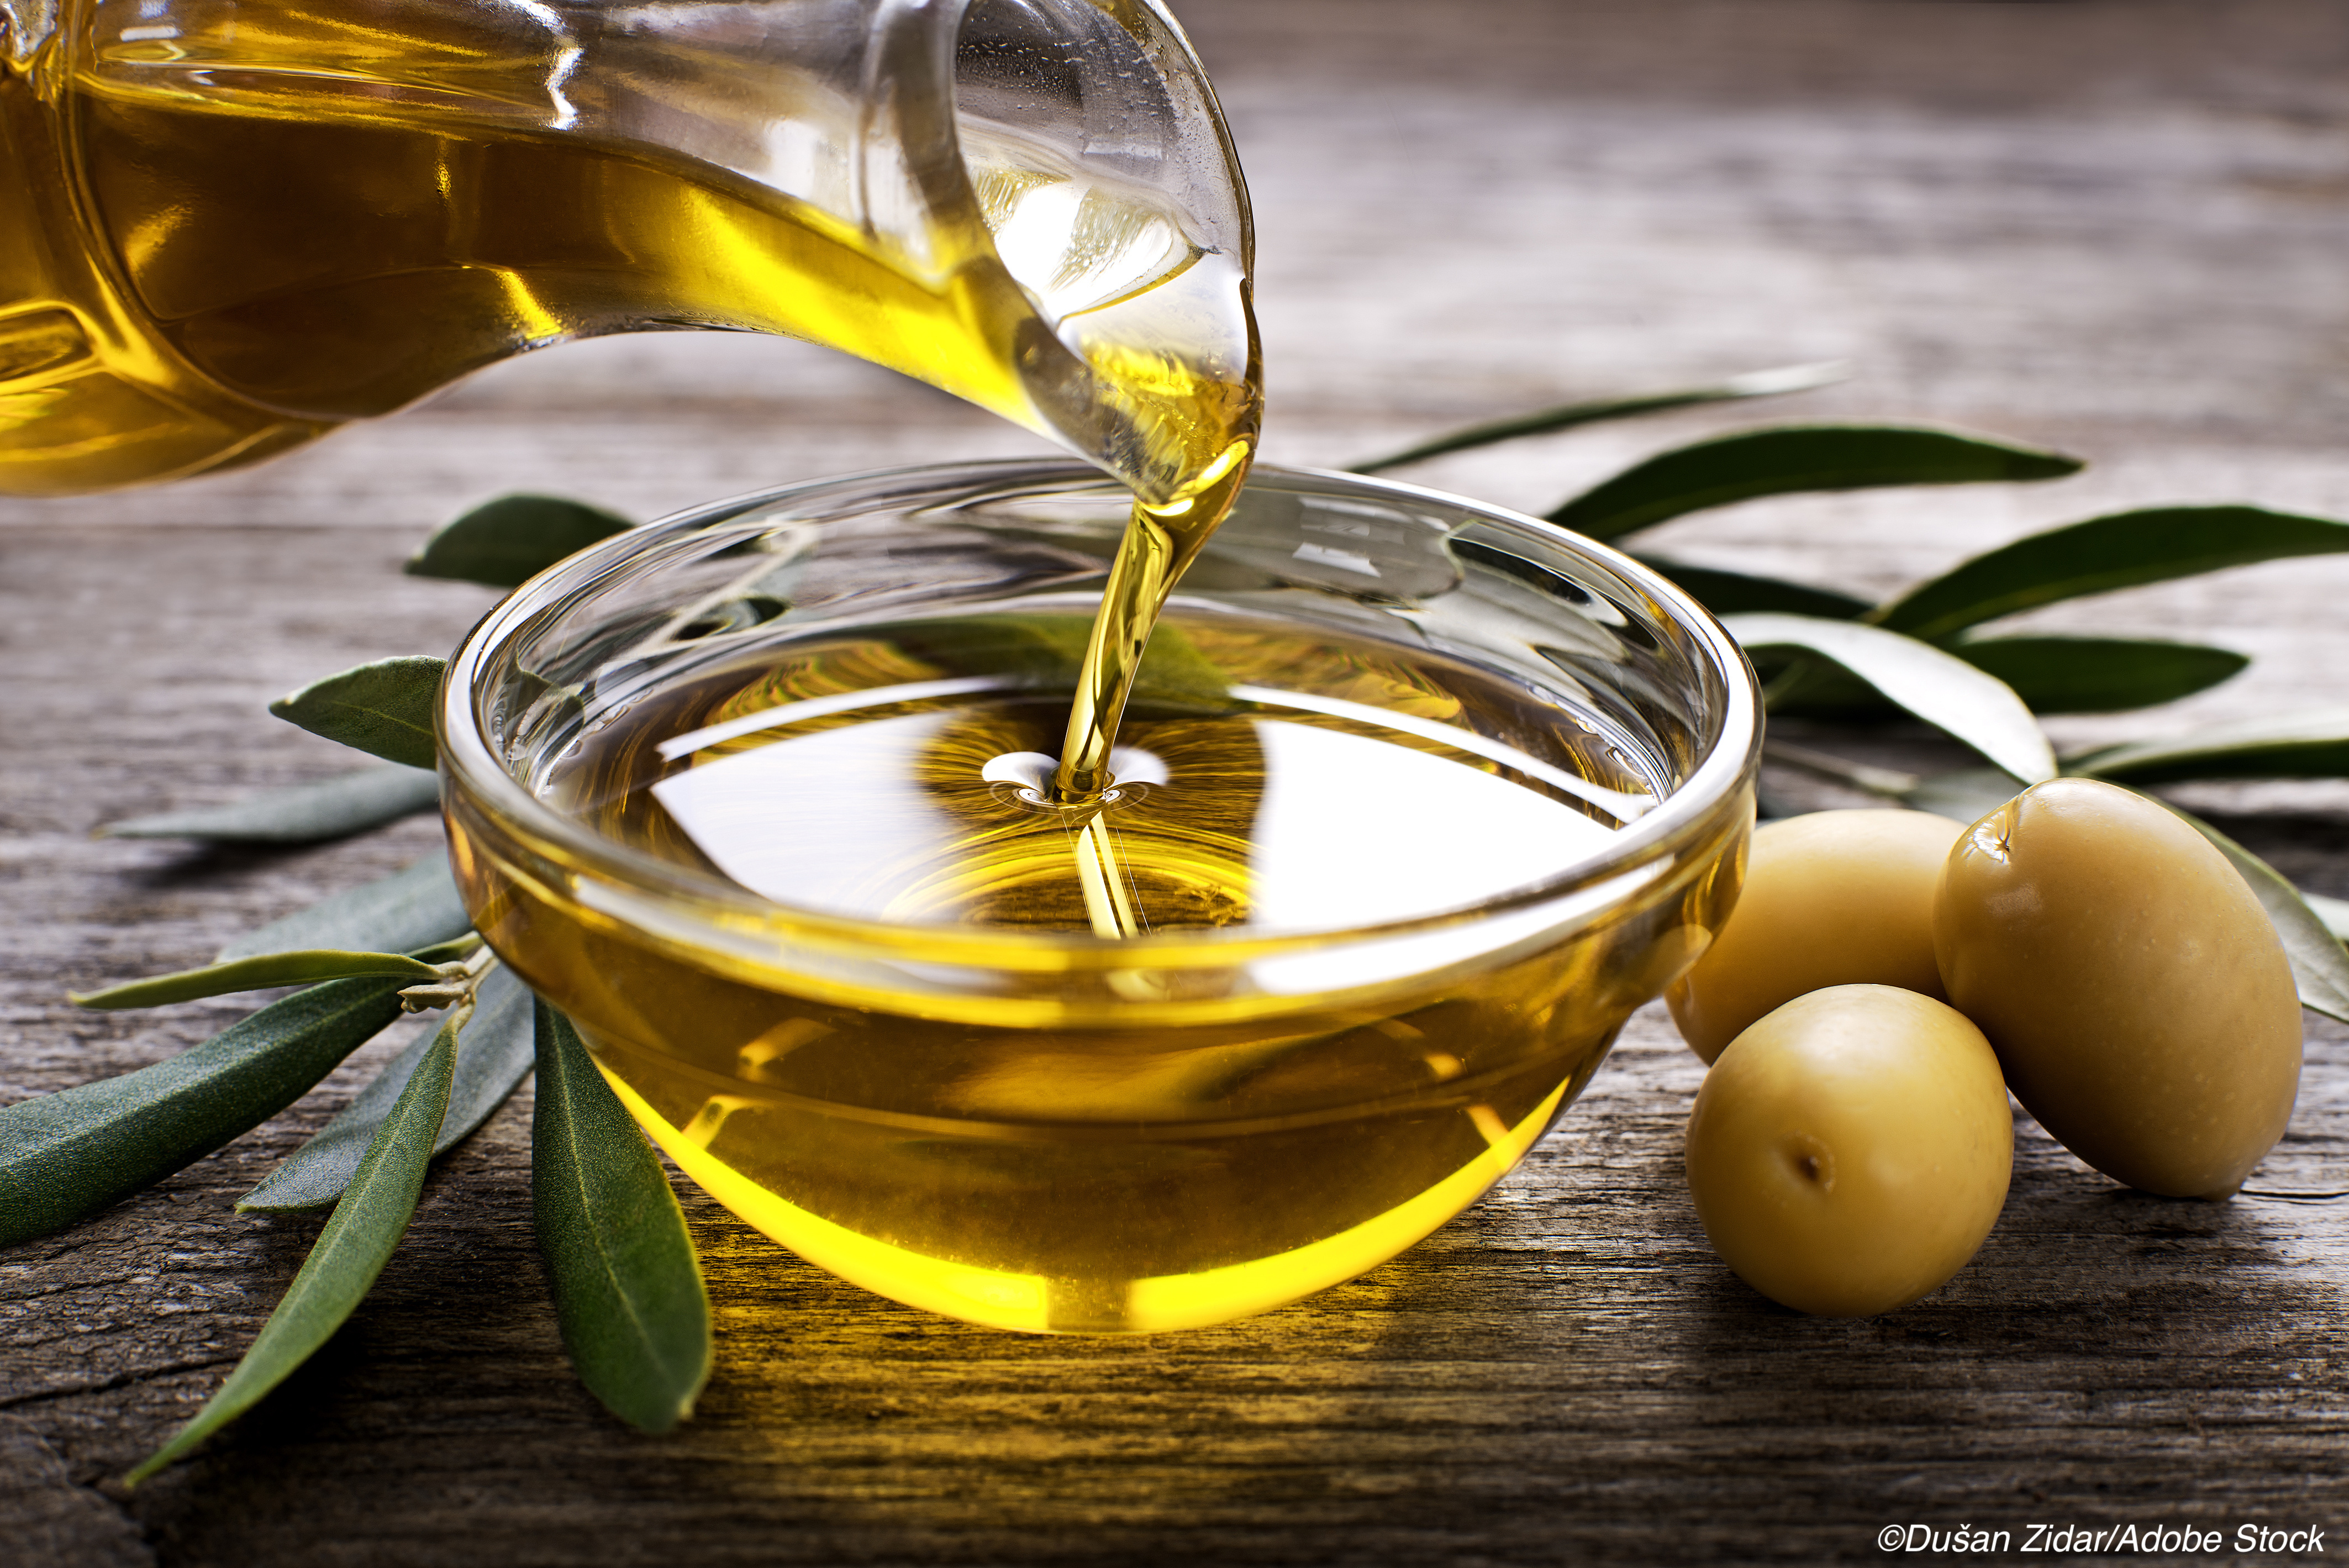 Olive Oil Reduces Both Total and Cause-specific Mortality